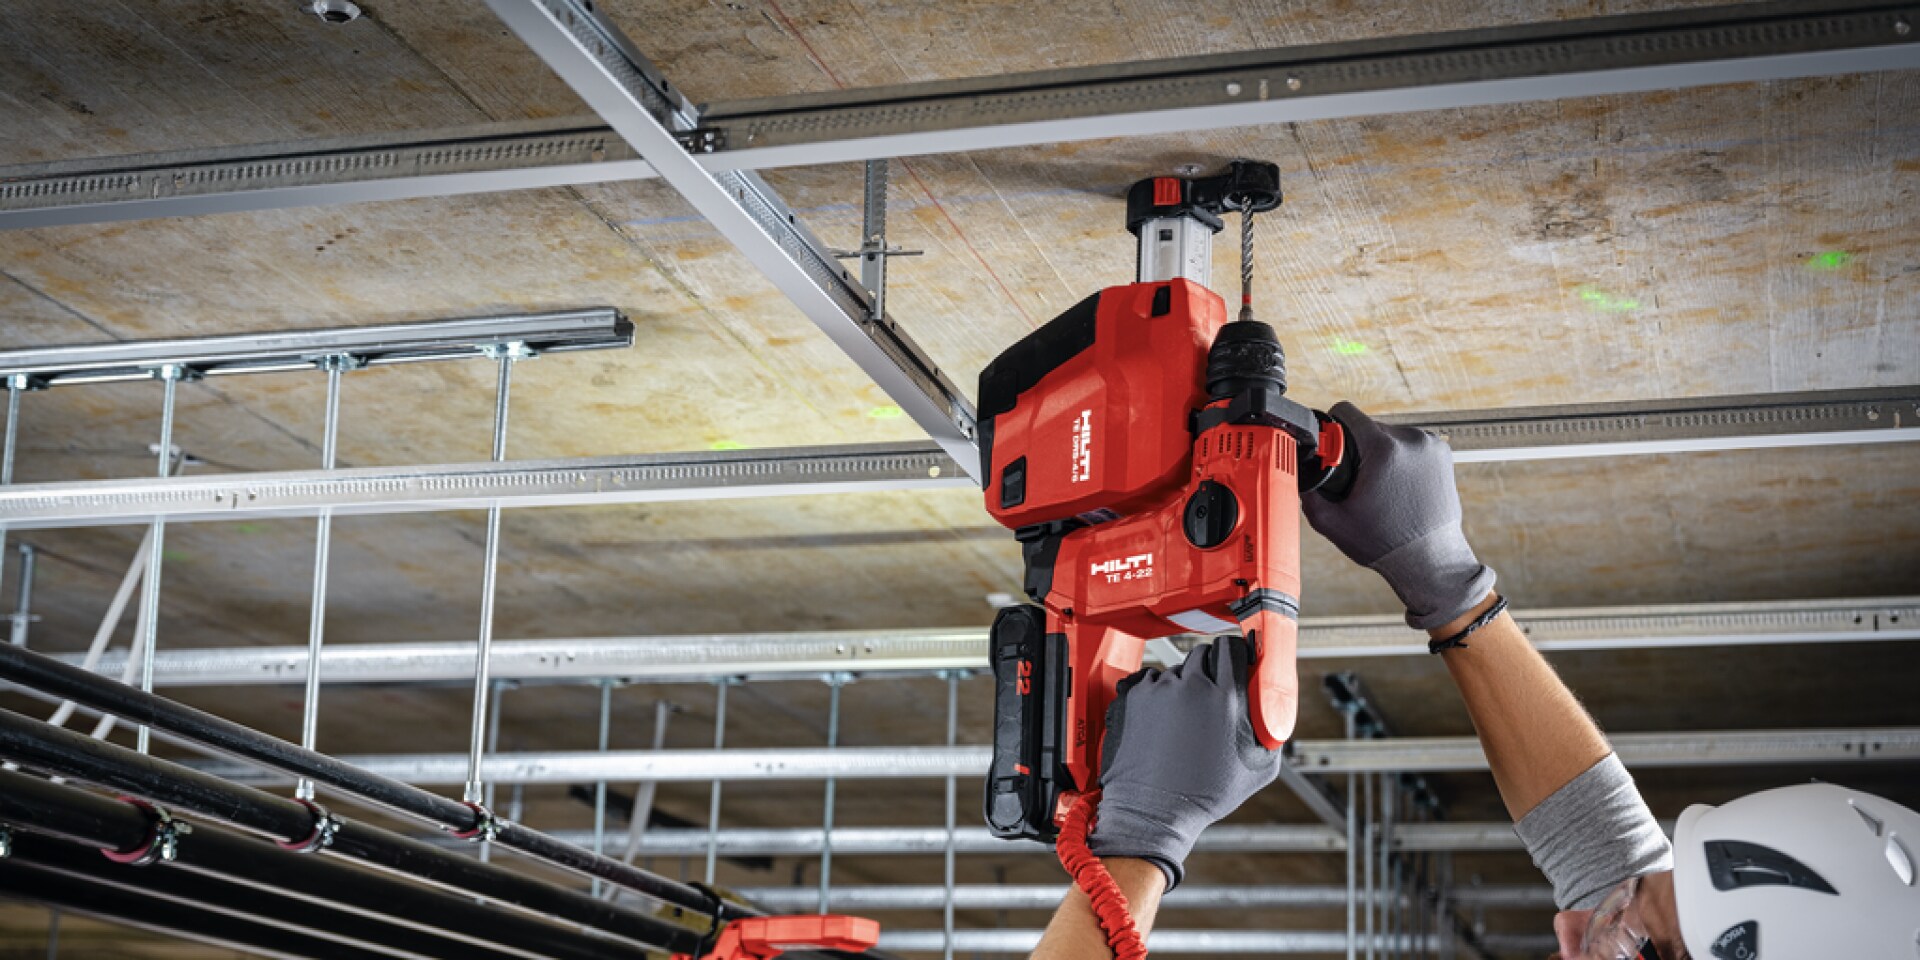 A person works with the Hilti Nuron TE 4-22 cordless rotary hammer.